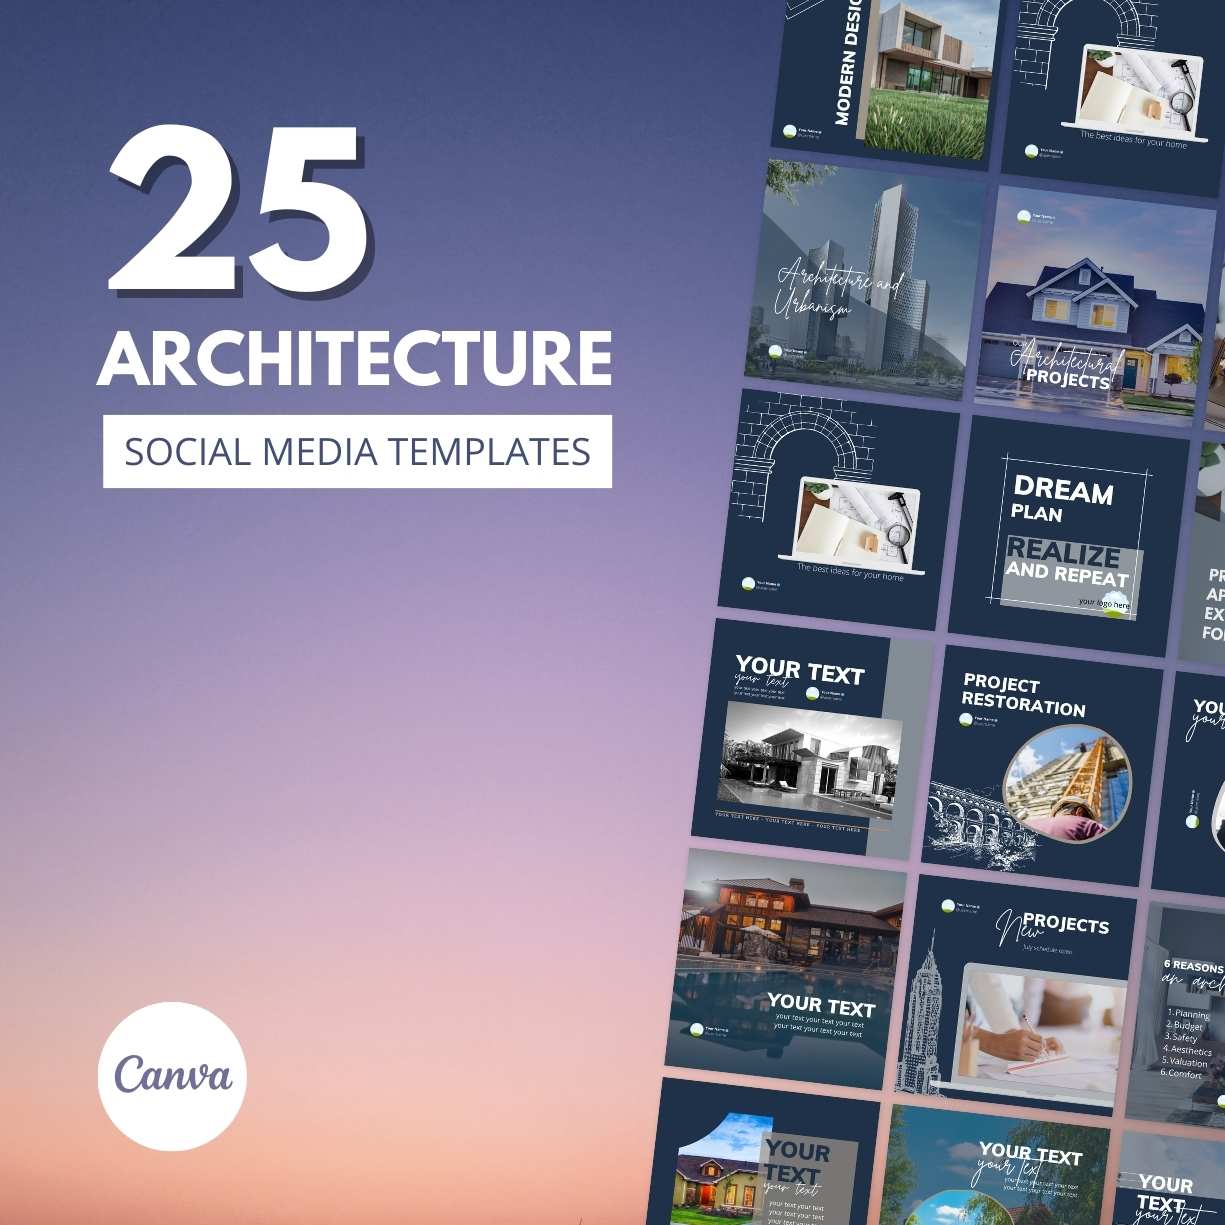 25 Architecture Social Media Templates Fully Editable In Canva cover image.